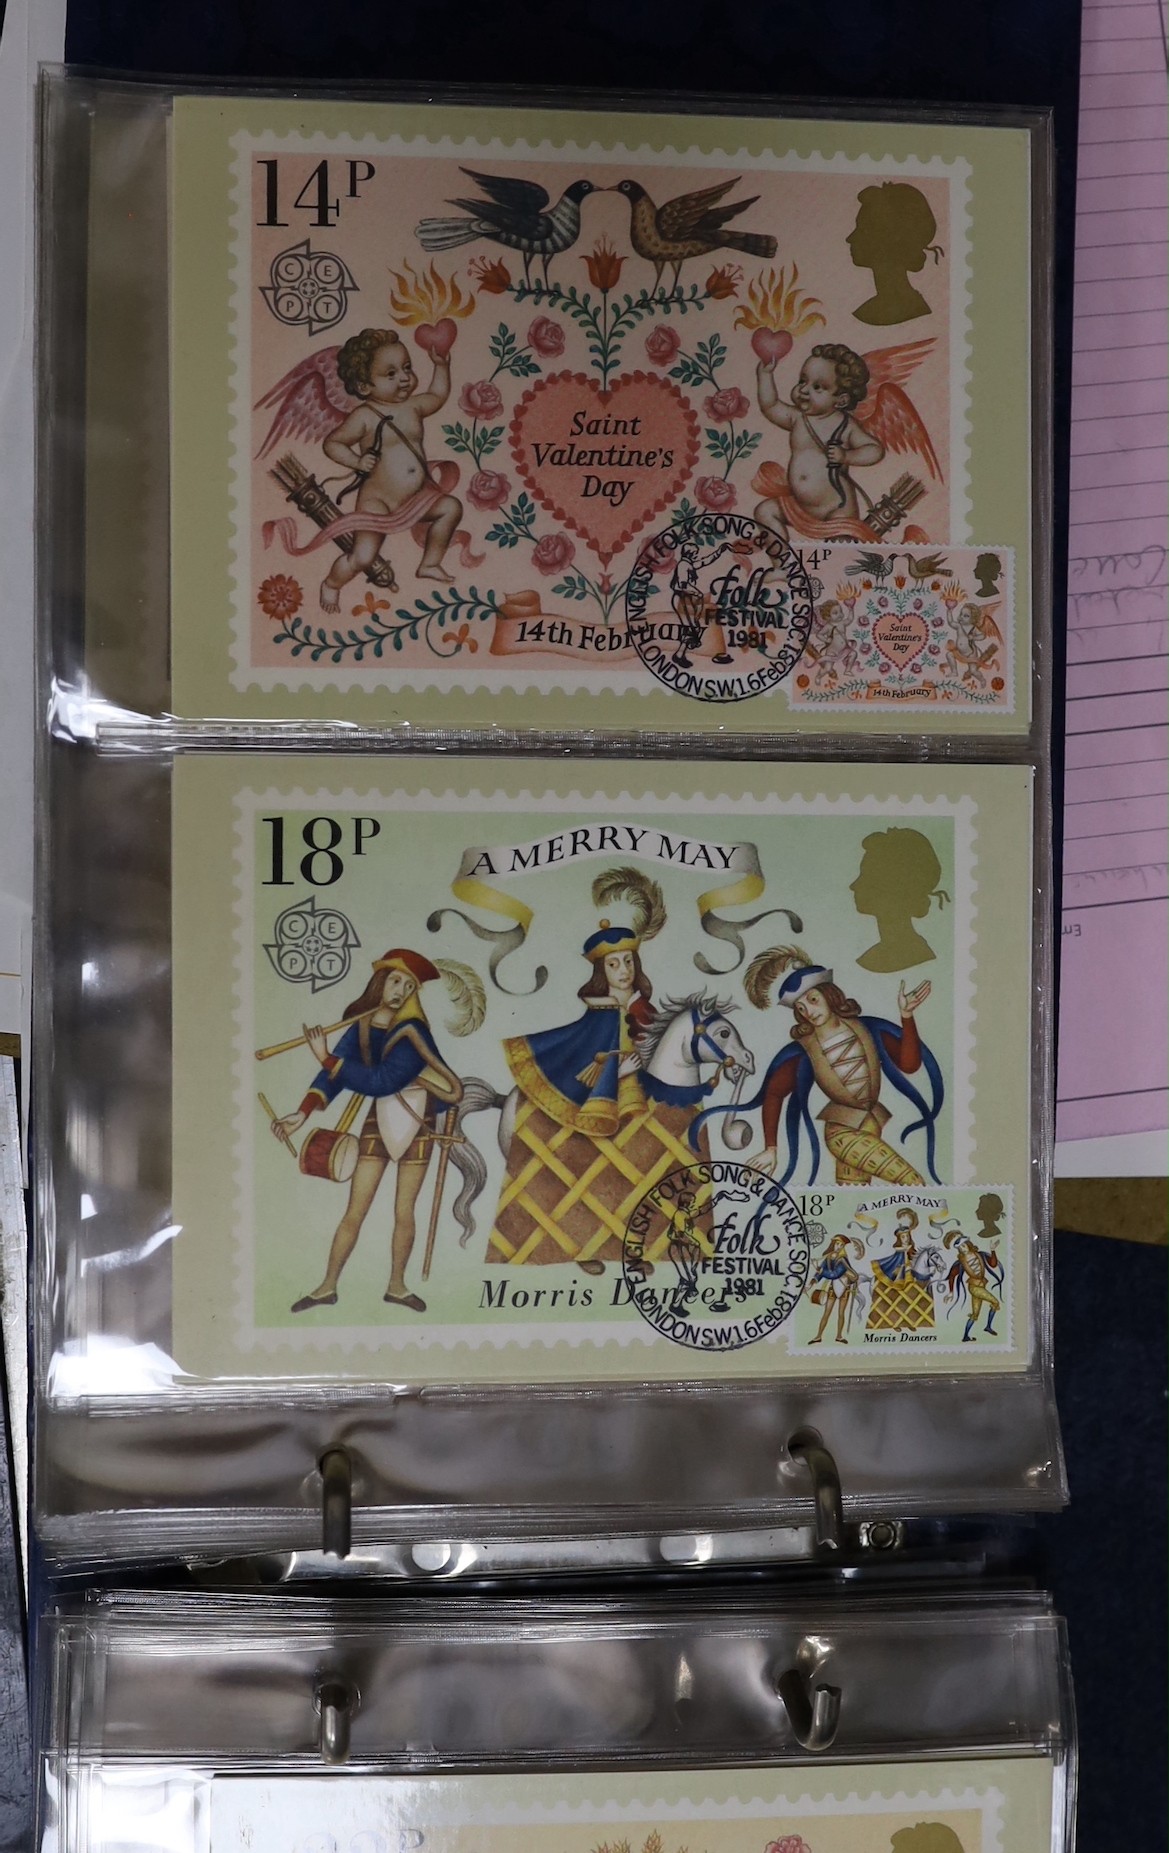 A collection of First Day Covers